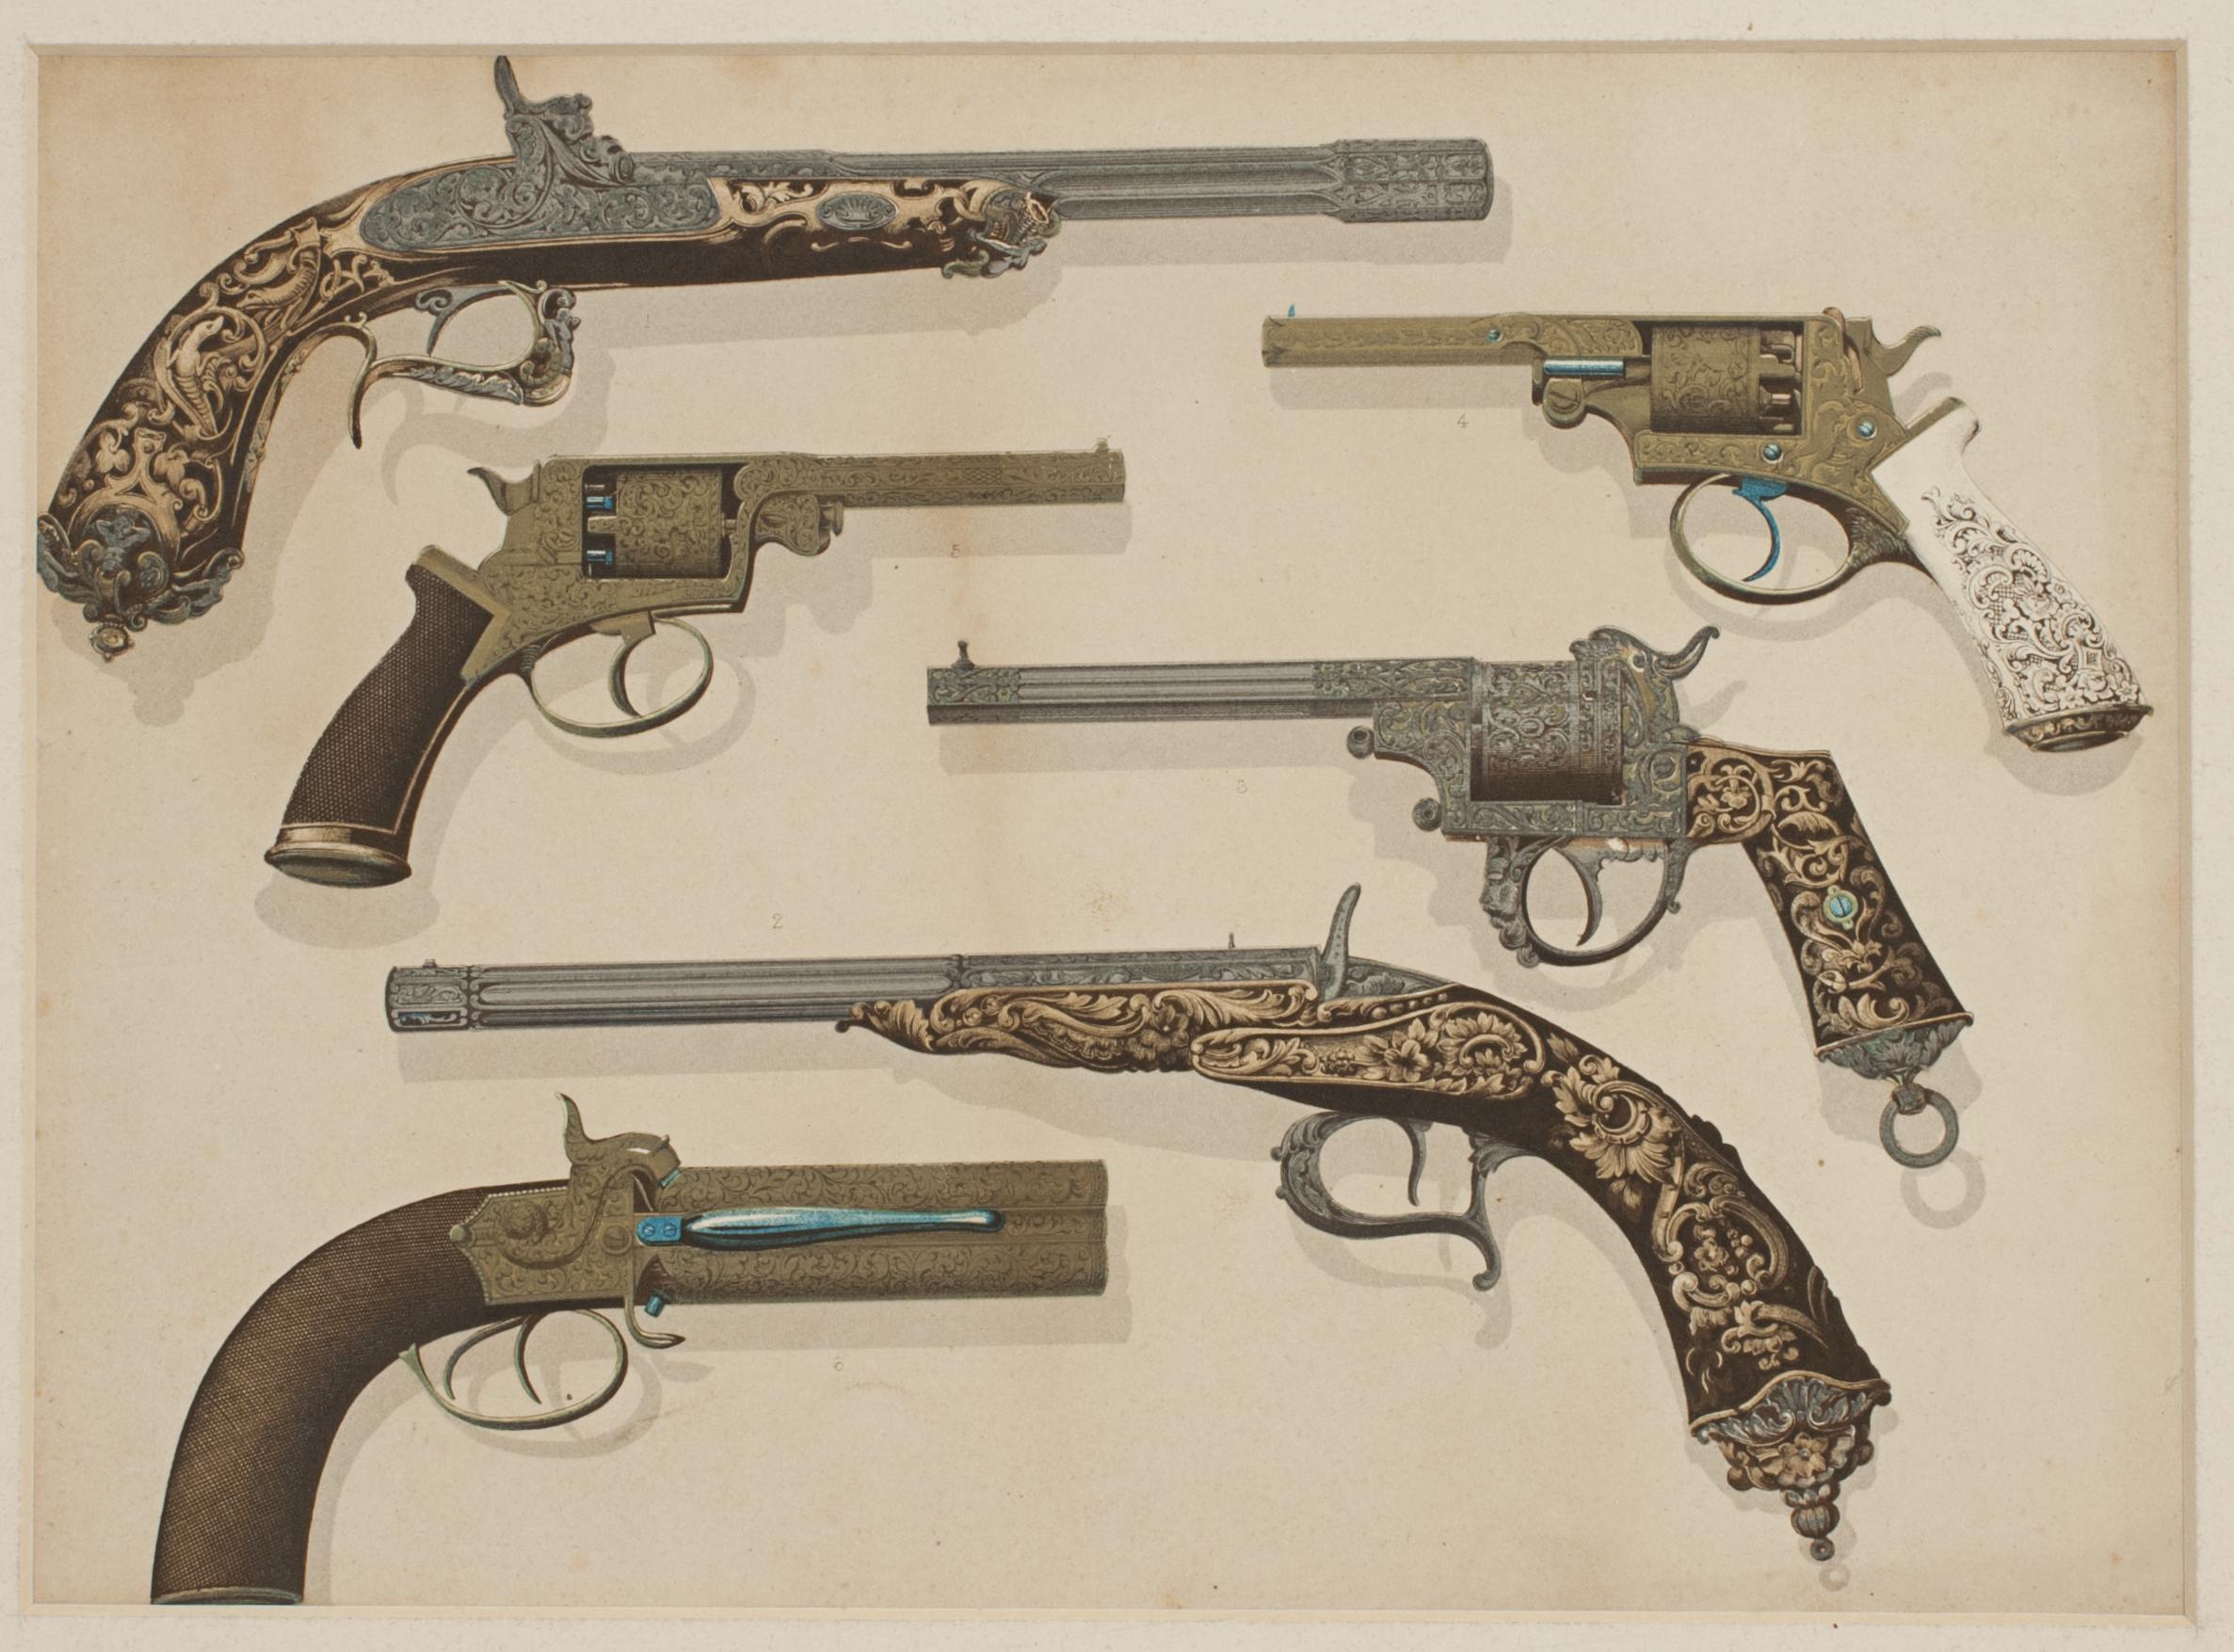 Late 19th Century Pair of Antique Firearms, Guns, Pistols and Revolvers and Rifles Prints